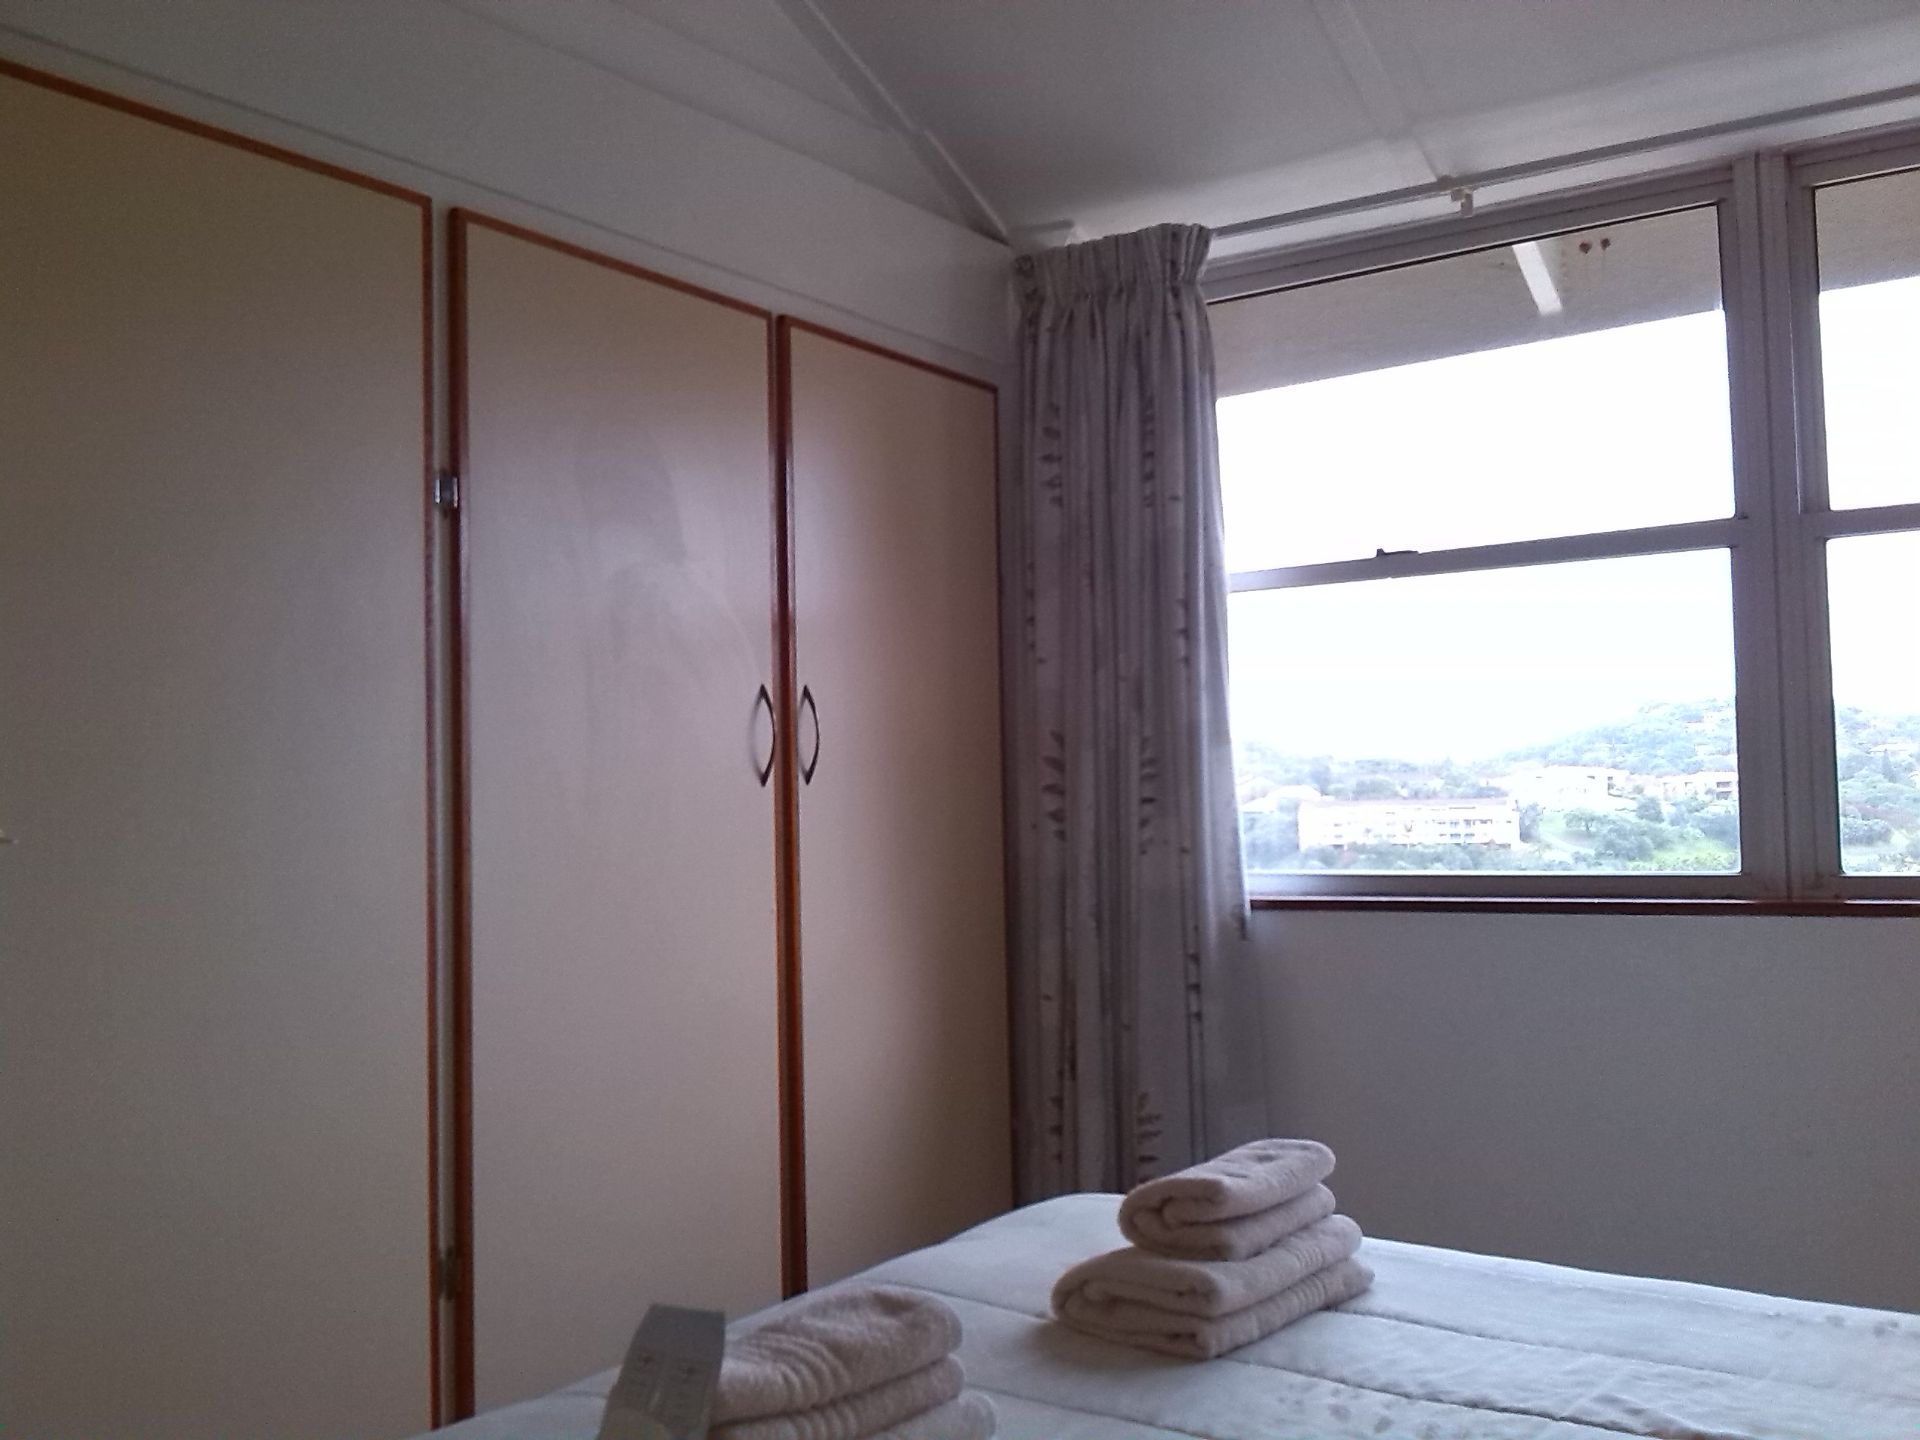 Pearly Shells - 3 Beds (8 Sleepers Max)  . Date - 20/05/2016 - 27/05/2016 - (Shareblock) - Image 17 of 32